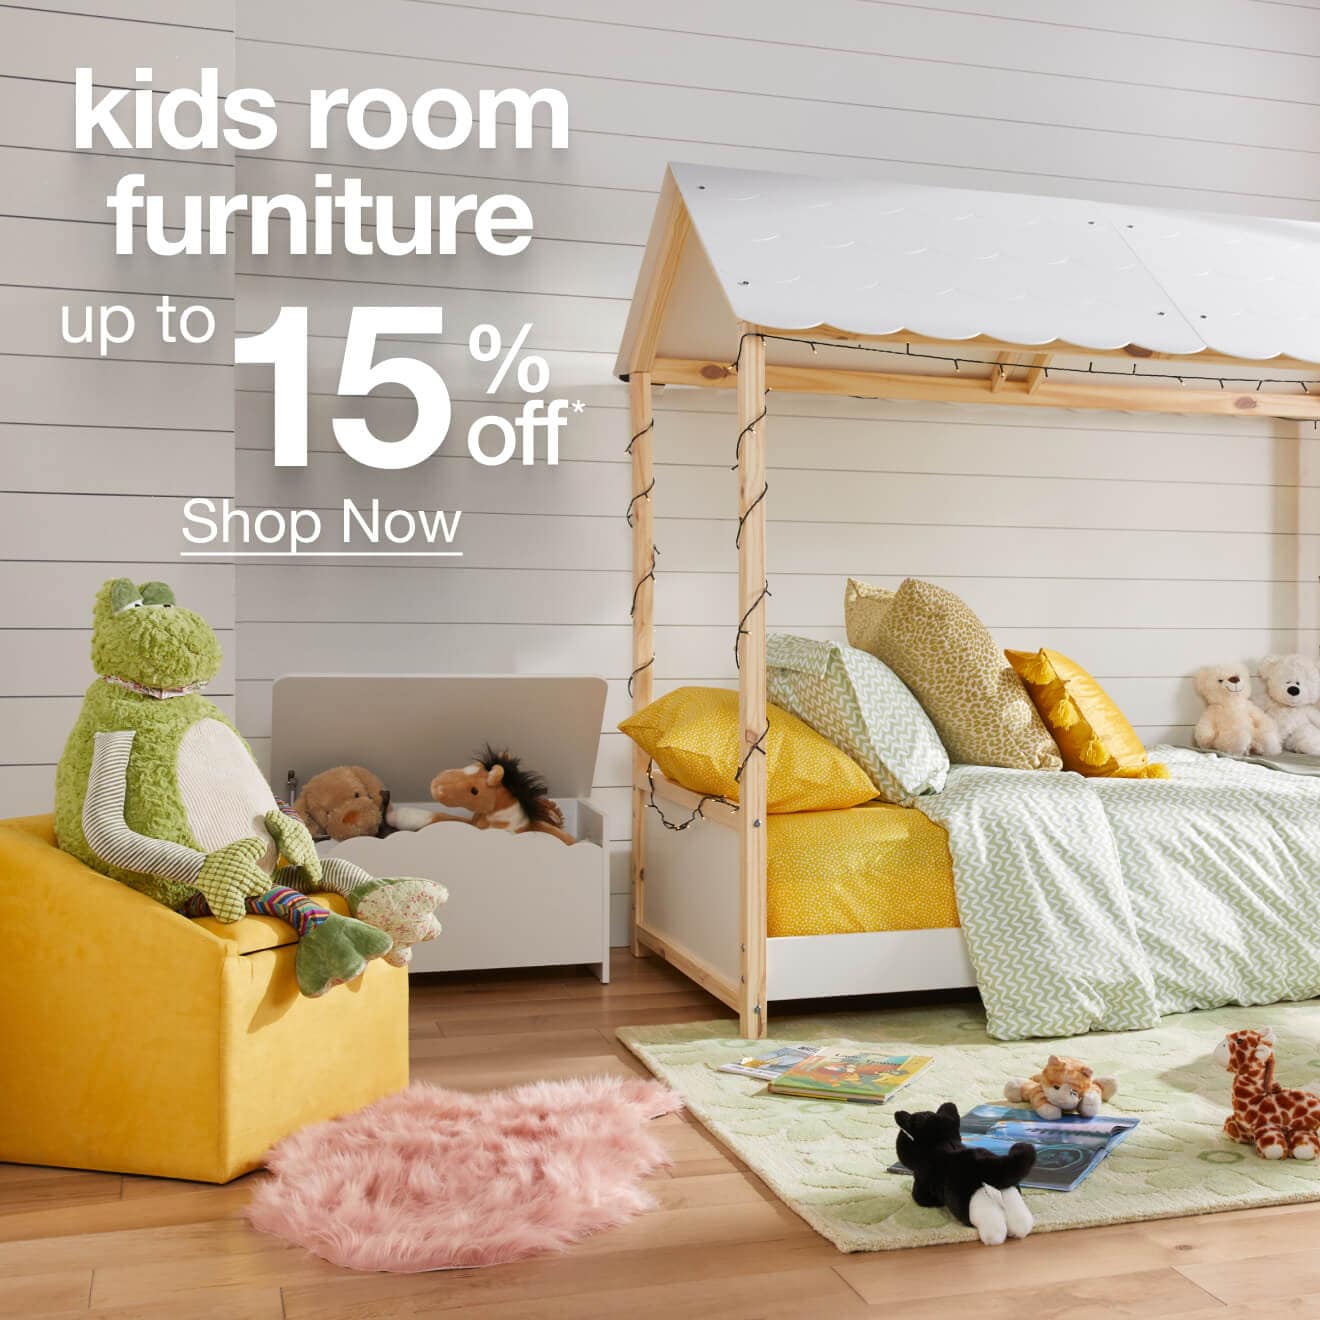 Up to 15% Off Kids Furniture — Shop Now!